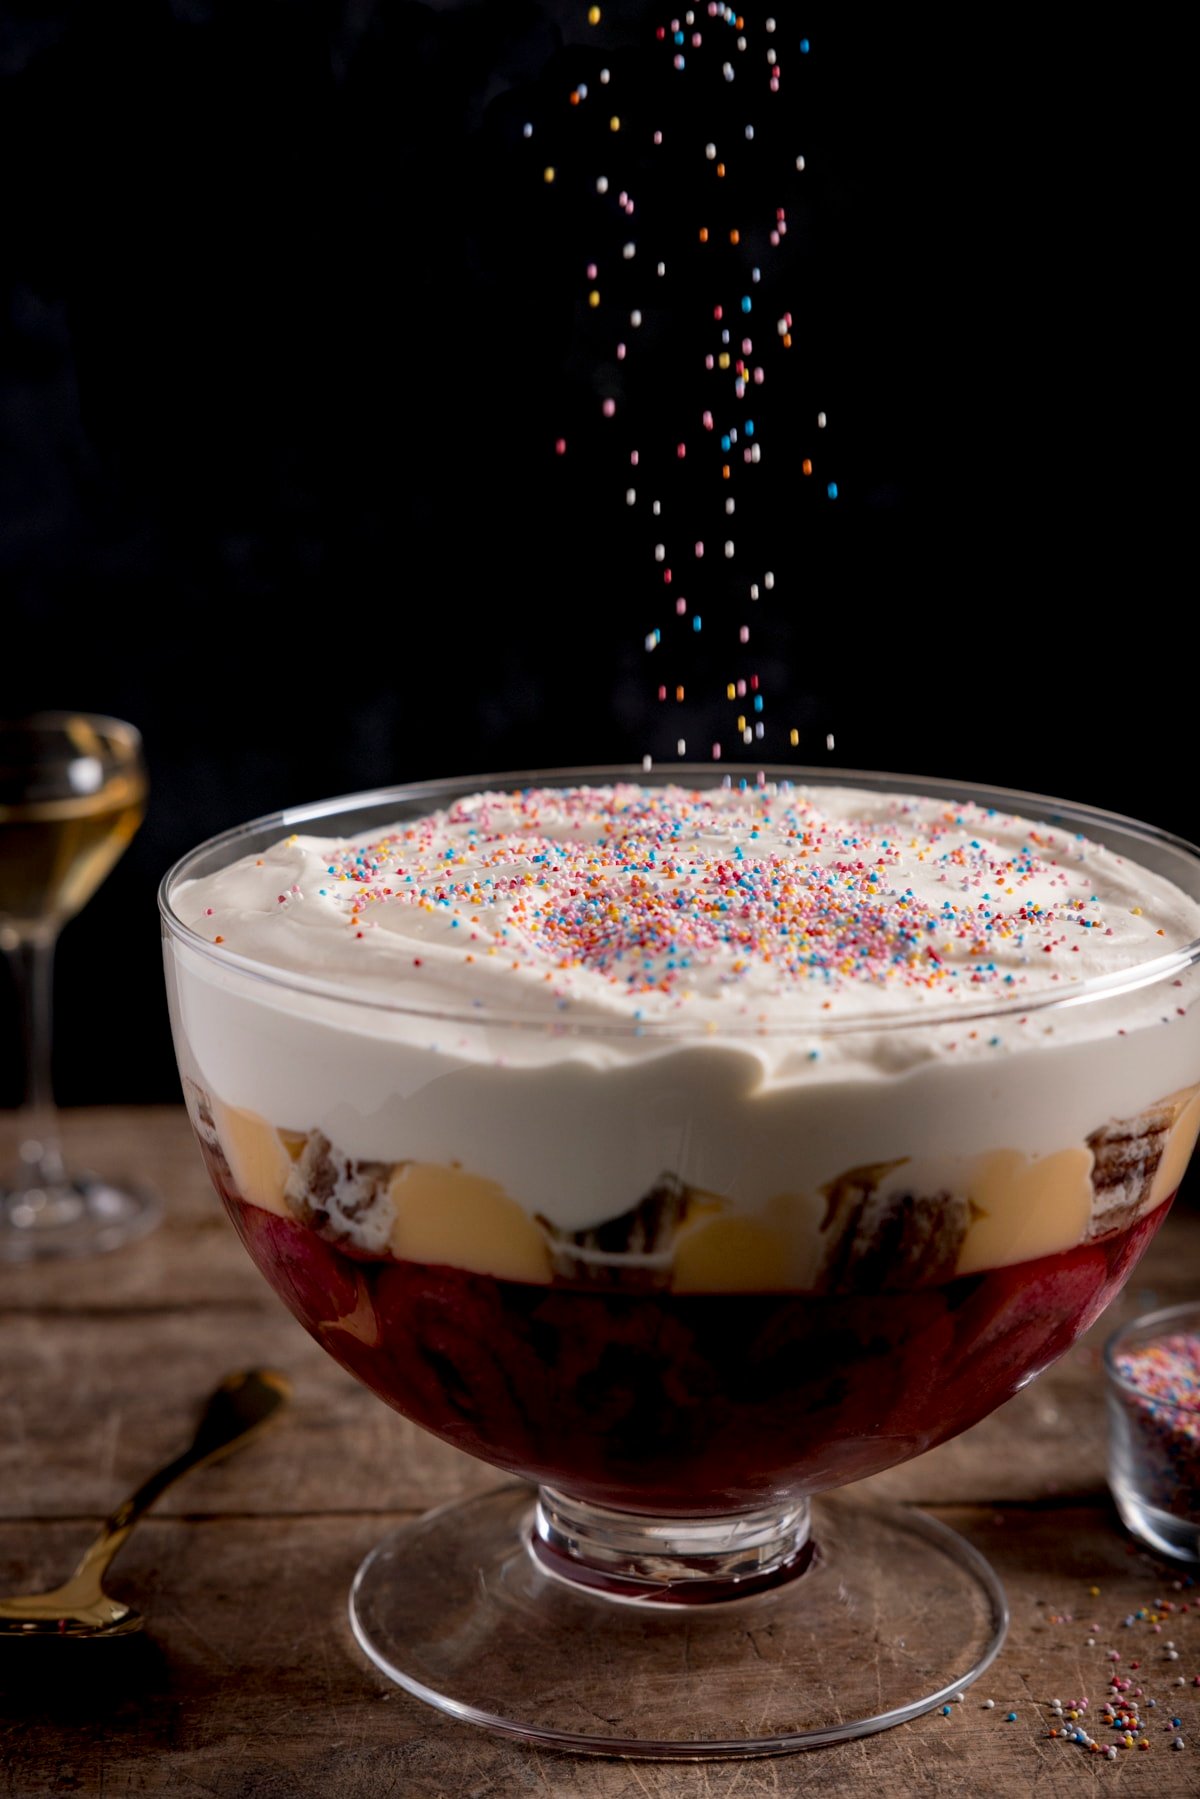 Rainbow sprinkles being sprinkled onto a large bowl of sherry trifle. The trifle is on a wooden table, against a dark background.